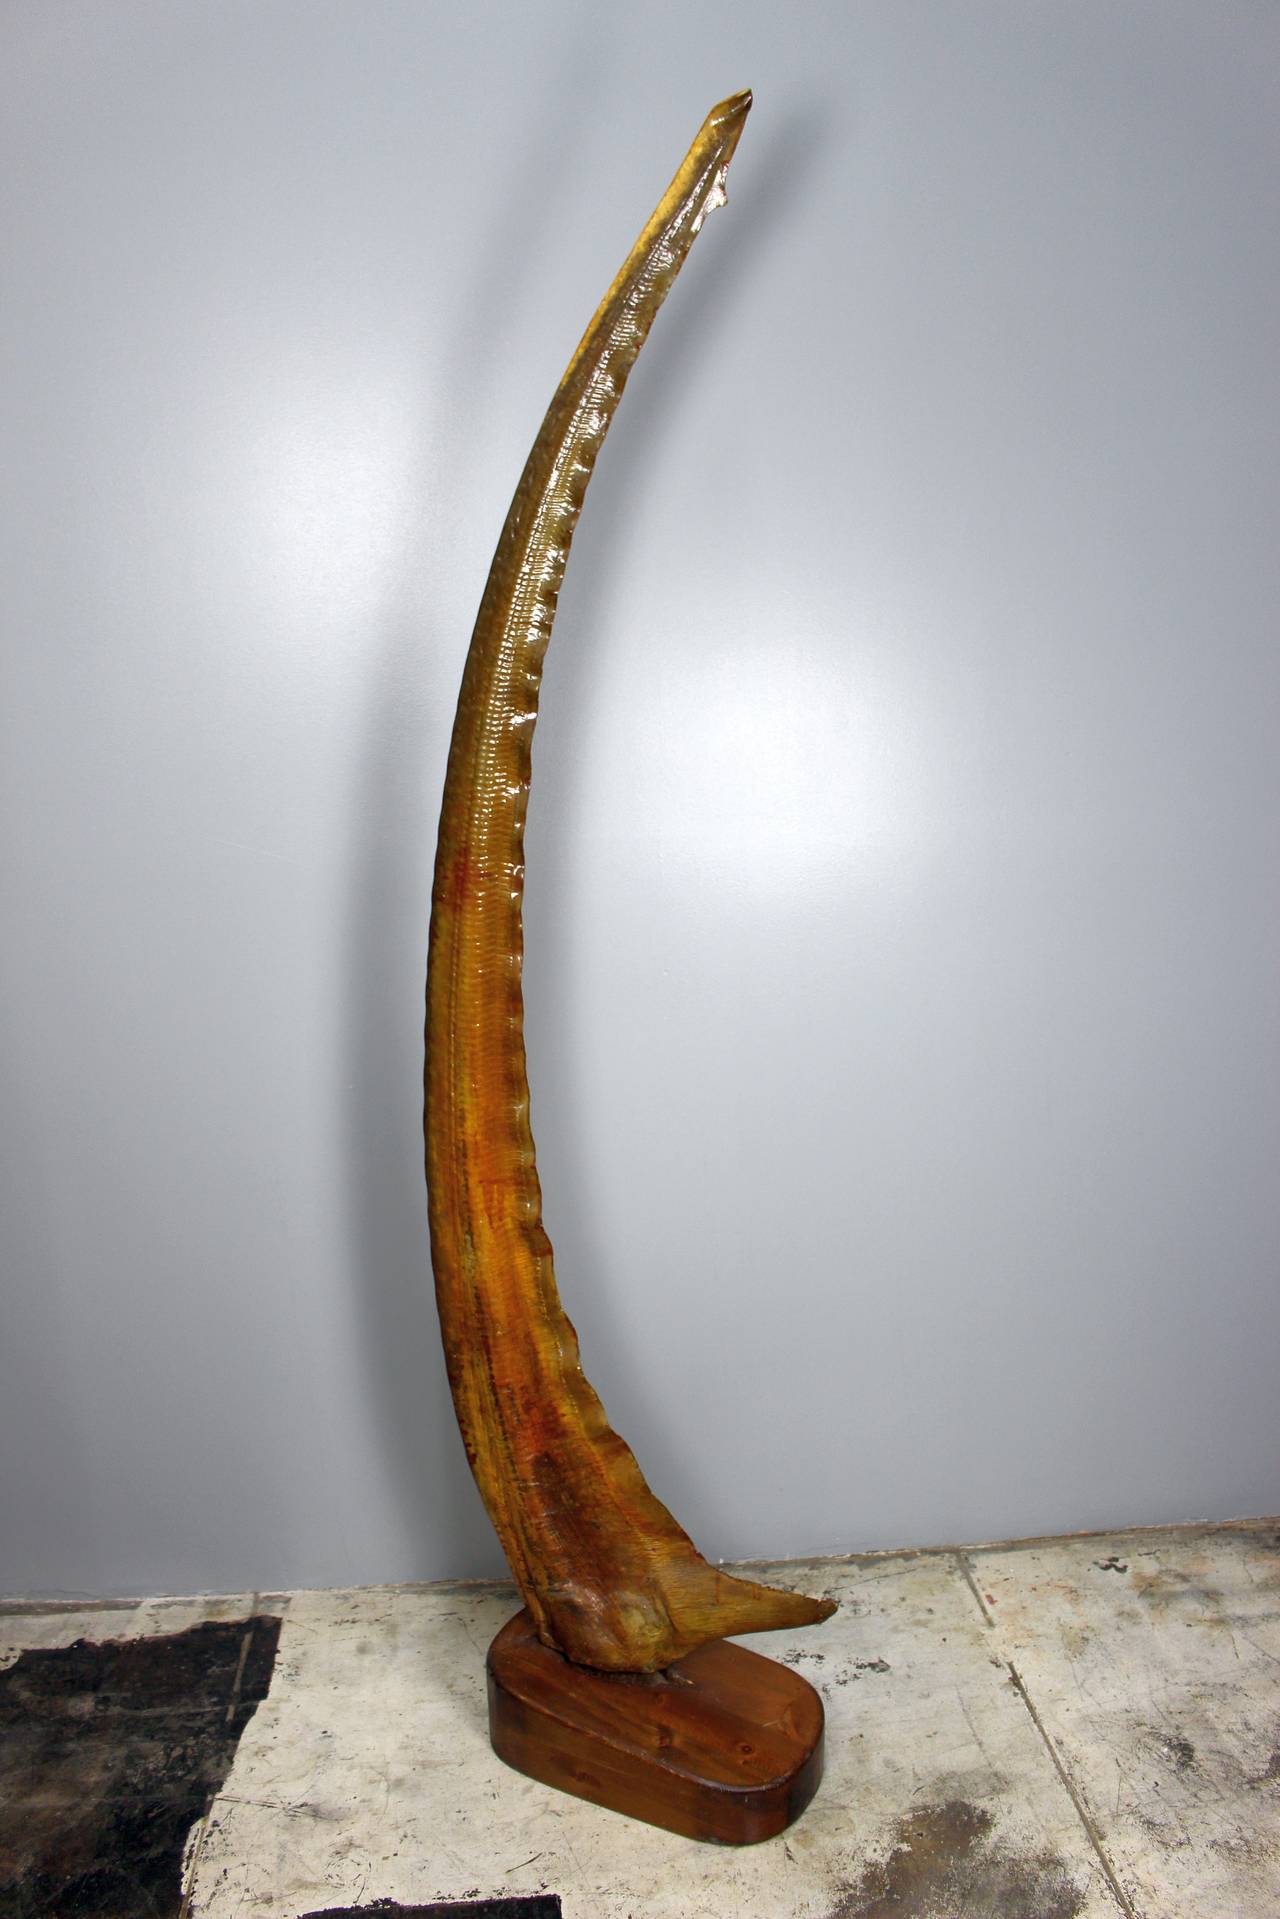 Alopias vulpinus, which may reach a length of 6.1 meters (20 ft) and a weight of over 500kg- 1100 lb. This is an antique tail converted in to the sculpture.